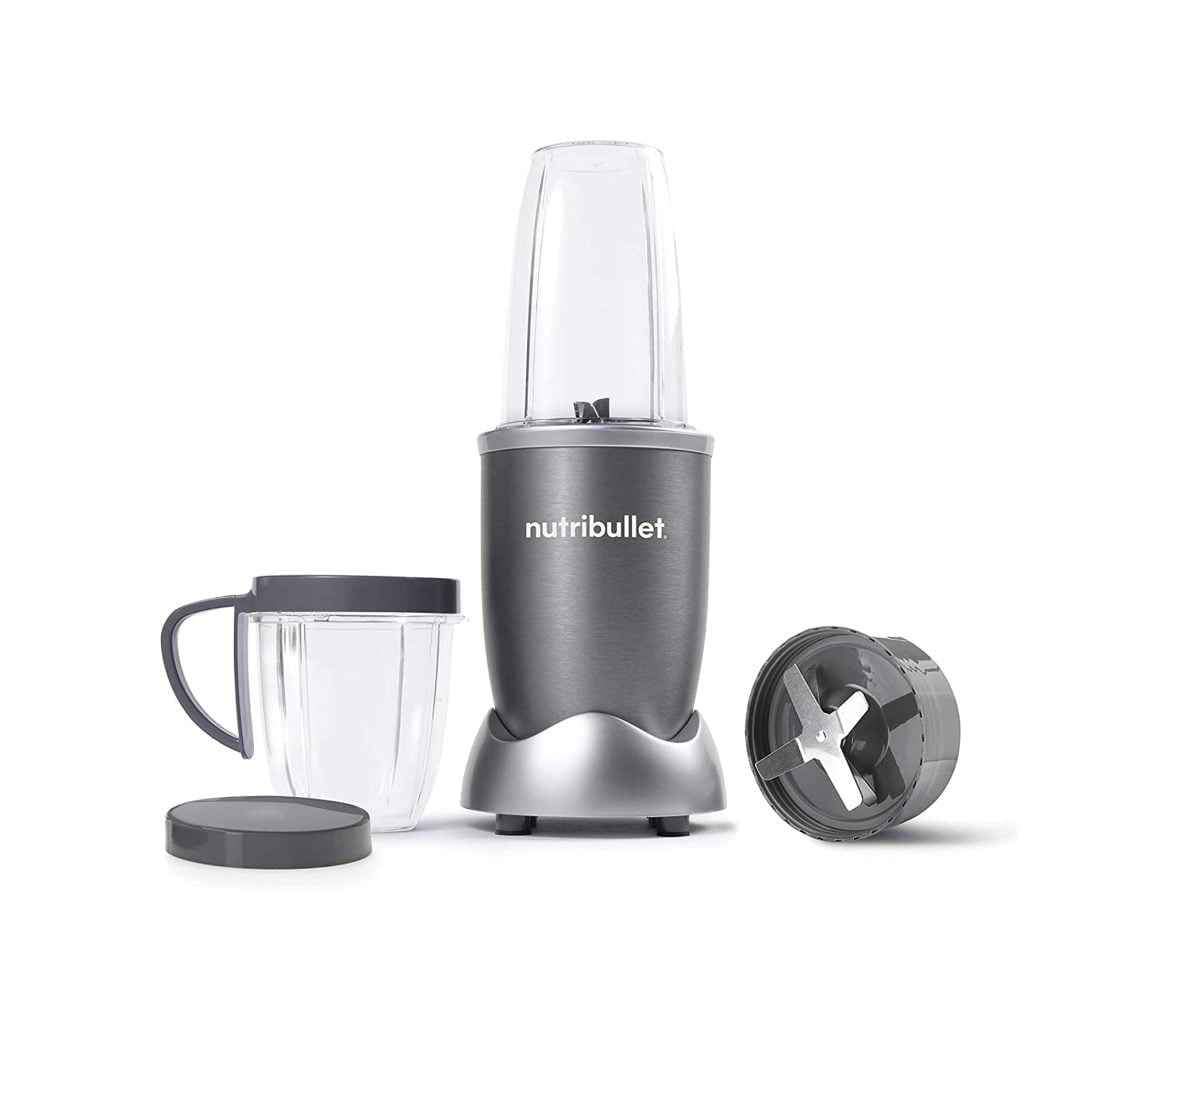 &Lt;Ul Class=&Quot;A-Unordered-List A-Vertical A-Spacing-Mini&Quot;&Gt; &Lt;Li&Gt;&Lt;Span Class=&Quot;A-List-Item&Quot;&Gt;Meet The Most Popular Nutribullet, Our Compact-Yet-Powerful Personal Blender. You Choose What Goes In To Get The Most Out Of Every Ingredient, Every Day.&Lt;/Span&Gt;&Lt;/Li&Gt; &Lt;Li&Gt;&Lt;Span Class=&Quot;A-List-Item&Quot;&Gt;The Nutribullet Is The Fastest, Easiest Solution For Making Nutrient-Packed Smoothies. Load It Up With Your Favorite Whole Foods Like Nuts, Berries, And Spinach, Then Push, Twist, And Blend Your Way To A Healthier Lifestyle.&Lt;/Span&Gt;&Lt;/Li&Gt; &Lt;Li&Gt;&Lt;Span Class=&Quot;A-List-Item&Quot;&Gt;Powerful 600-Watt Motor And Refined Nutrient-Extraction Blades Blend Whole Foods Into Liquid Fuel For Your Body - In Seconds.&Lt;/Span&Gt;&Lt;/Li&Gt; &Lt;Li&Gt;&Lt;Span Class=&Quot;A-List-Item&Quot;&Gt;Hassle-Free Cleaning - Simply Twist Off The Blade, Rinse With Soap And Water, And Put The Cups In The Top Rack Of The Dishwasher.&Lt;/Span&Gt;&Lt;/Li&Gt; &Lt;Li&Gt;&Lt;Span Class=&Quot;A-List-Item&Quot;&Gt;What You Get: (1) 600 Watt Motor Base, (1) Extractor Blade, (1) 700Ml Cup, (1) 500Ml Cup, (1) Lip Ring With Handle, (1) Solid Lid, (1) User Guide, (1) Recipe Book. 2 Years Brand Warranty&Lt;/Span&Gt;&Lt;/Li&Gt; &Lt;/Ul&Gt; Nutribullet Nutribullet 600 Watts, 8 Piece Set, Multi-Function High Speed Blender, Mixer System With Nutrient Extractor, Smoothie Maker, Gray